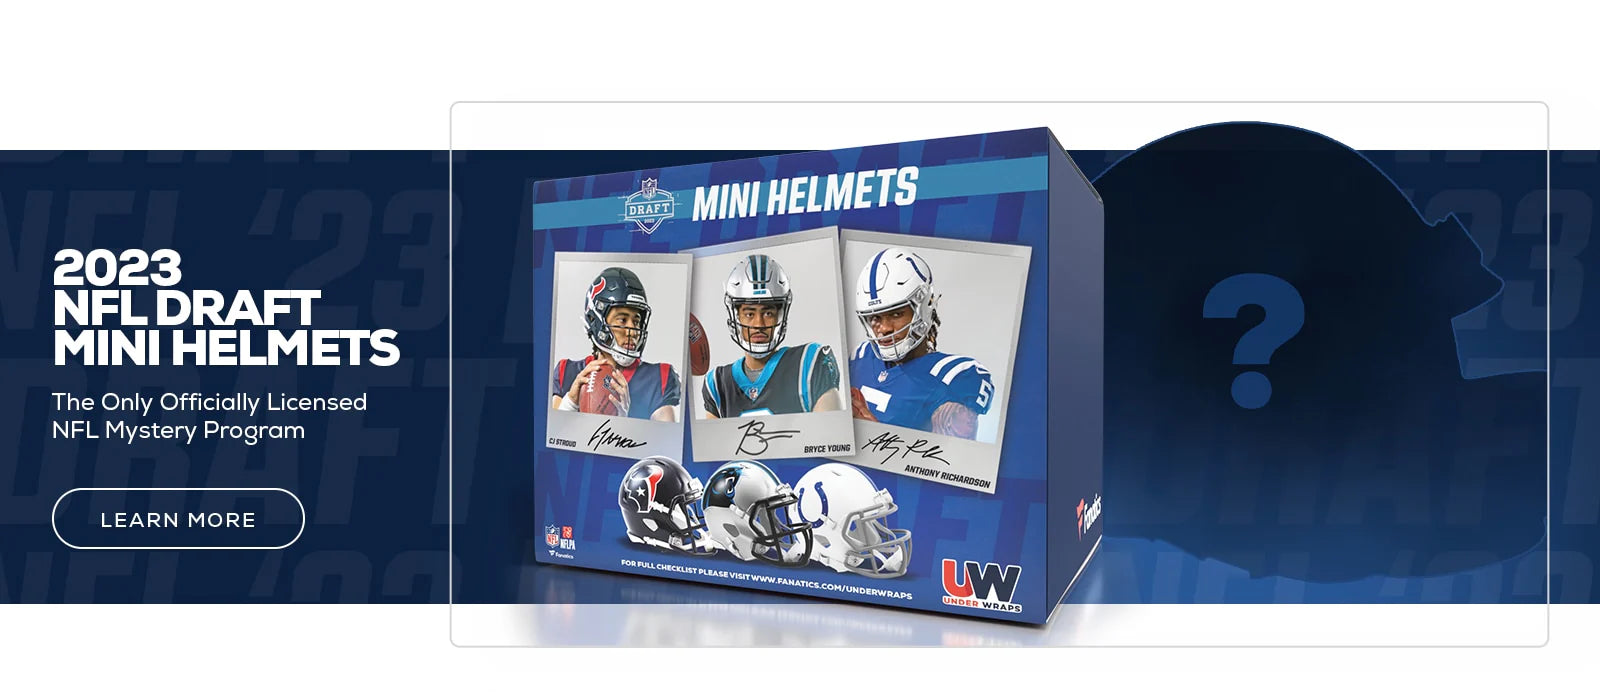 2017 Leaf Autographed Jersey Multi-Sport Edition Hobby Box